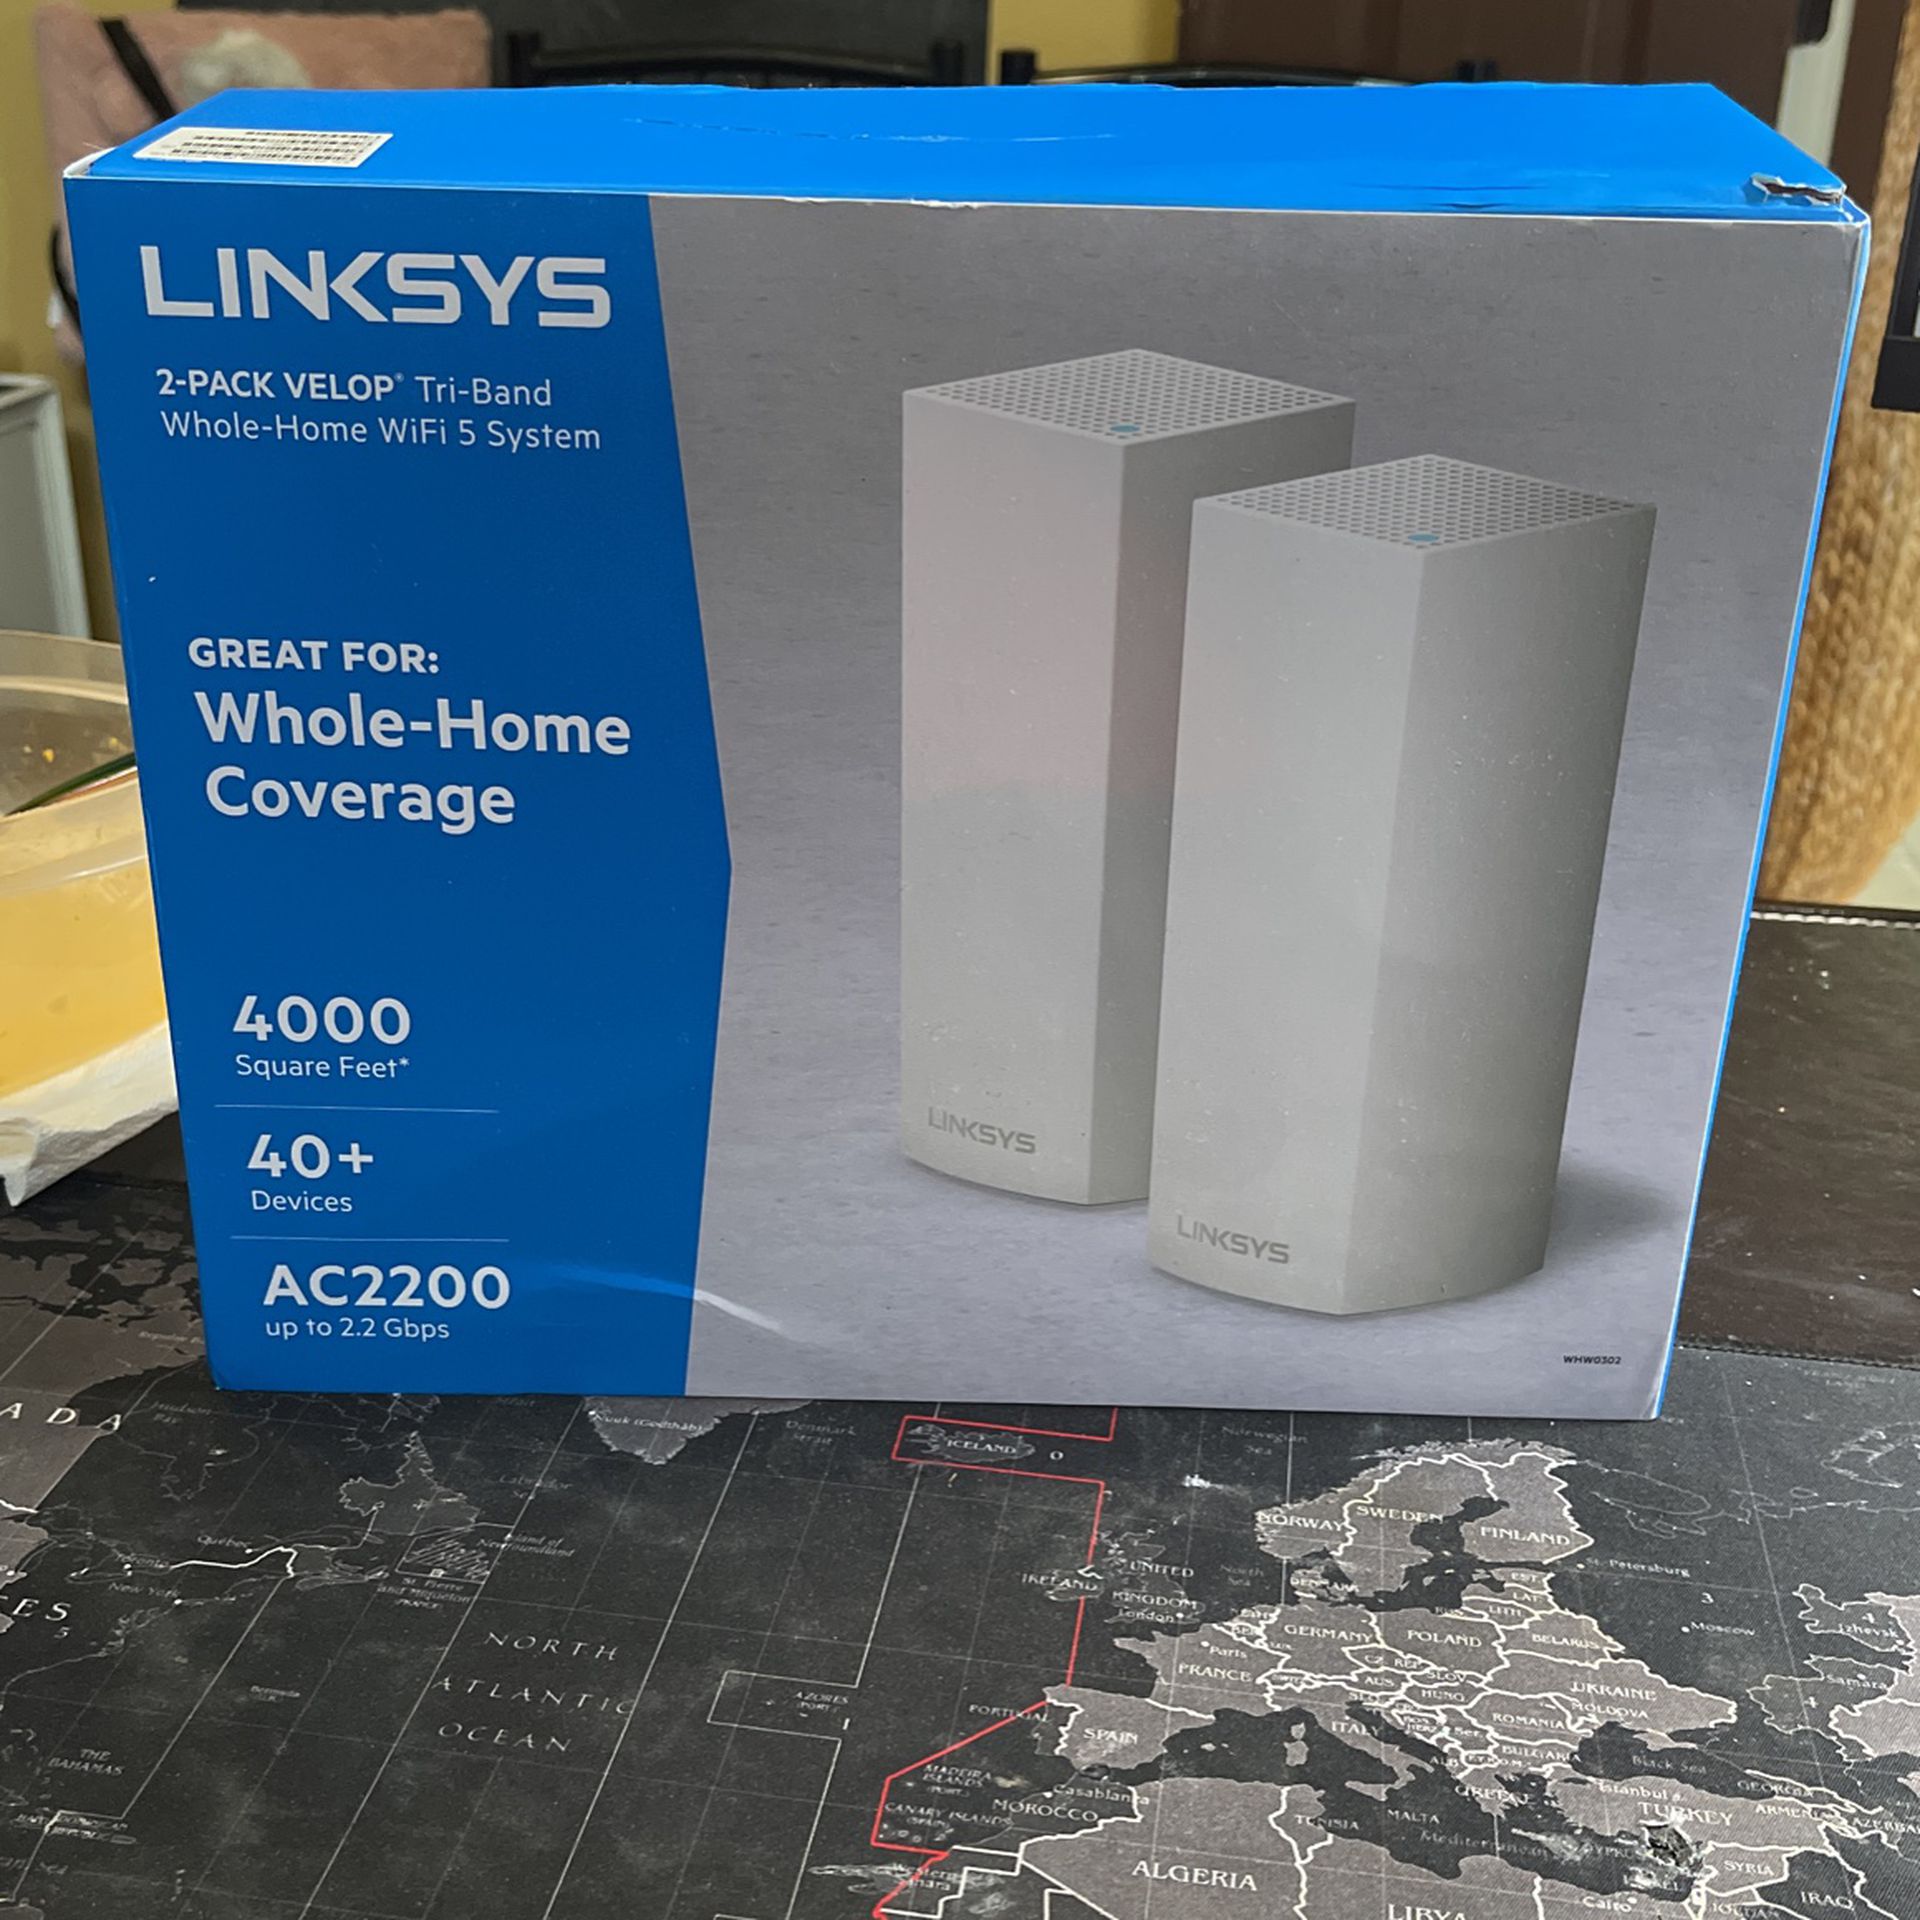 Linksys 2pack Velop Tri-band Whole Home WiFi System 